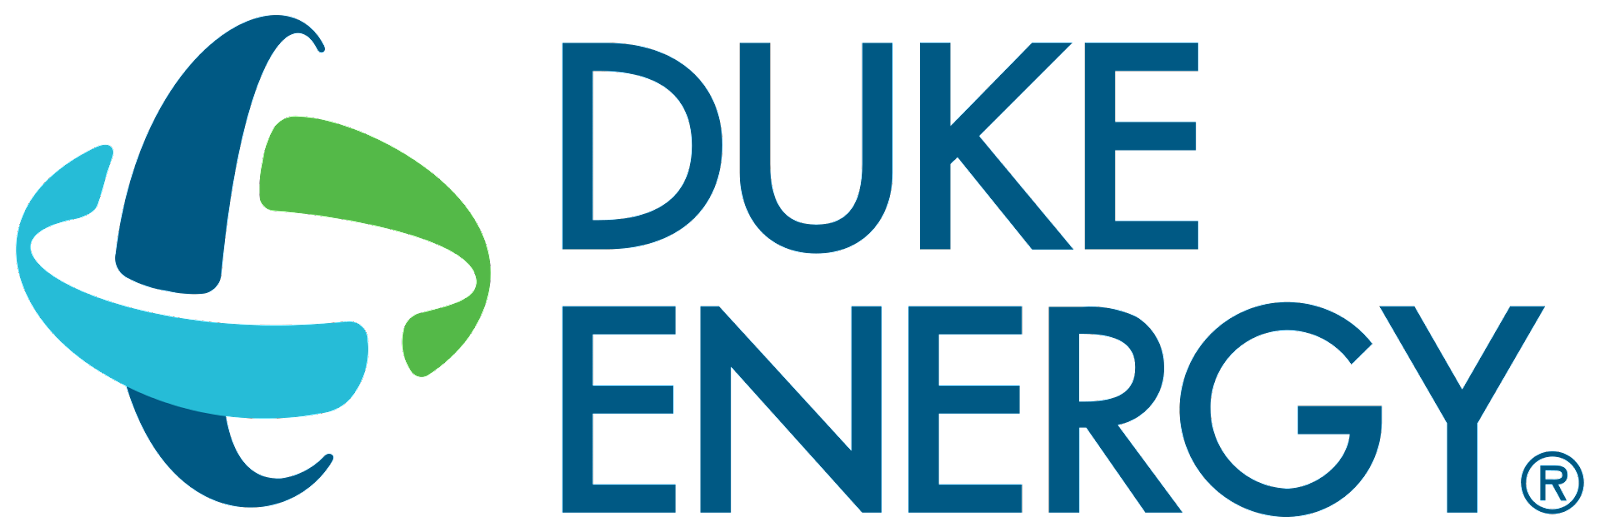 All about Duke Energy Largest Electric power holding company